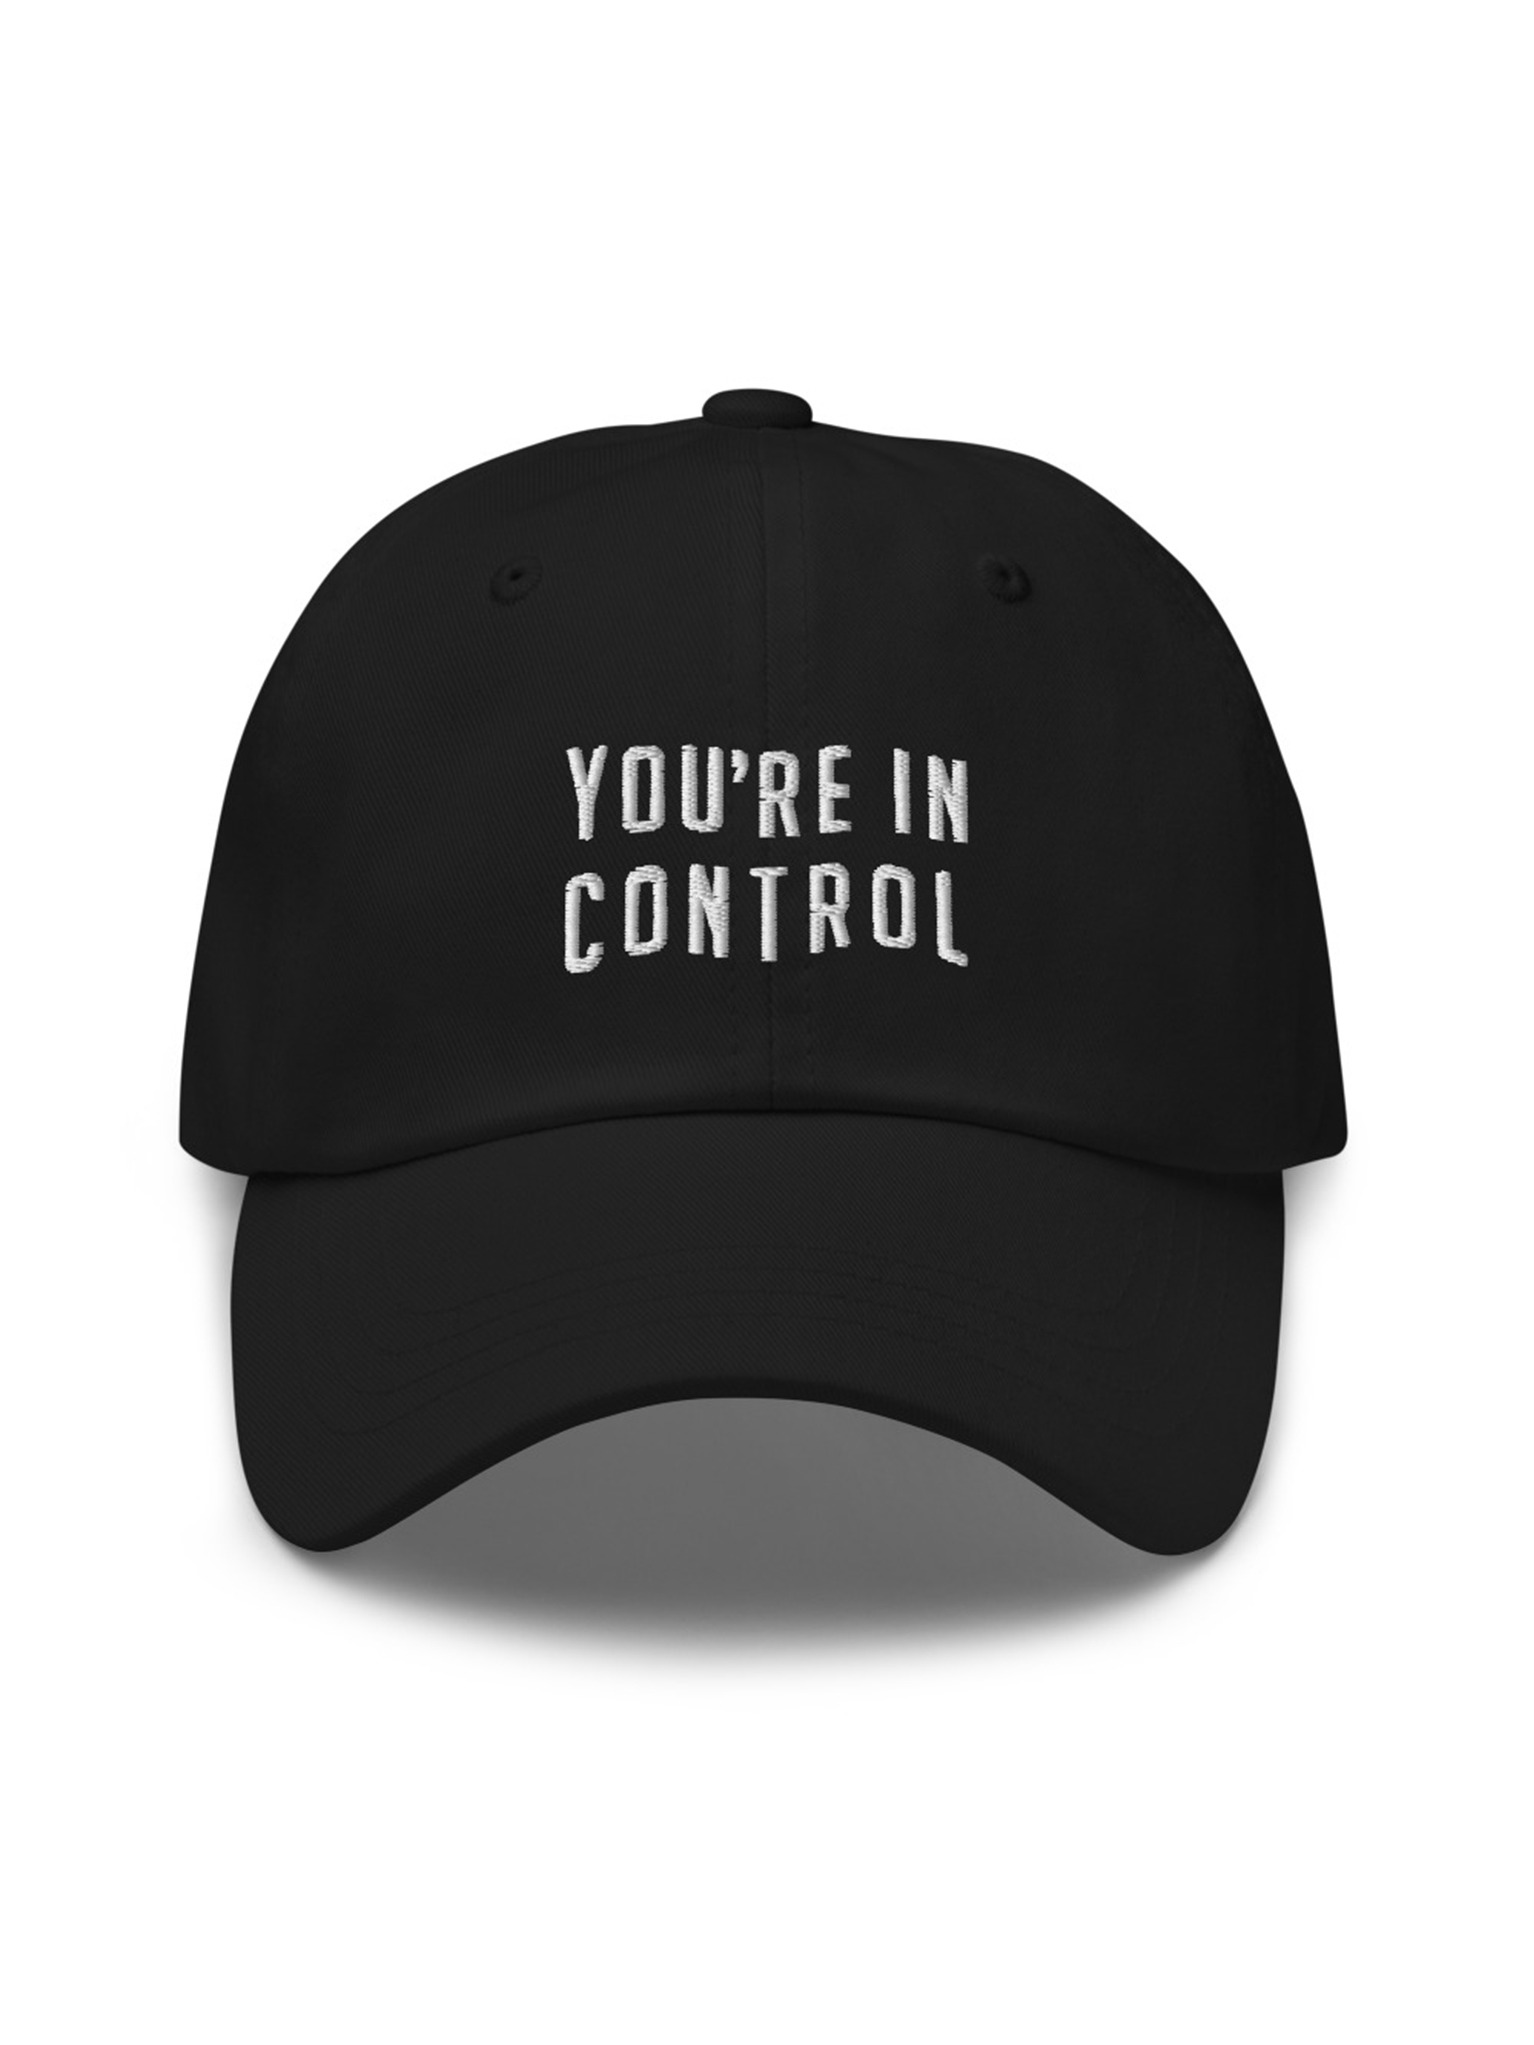 You're In Control - Embroidered Hat | Zach Pincince